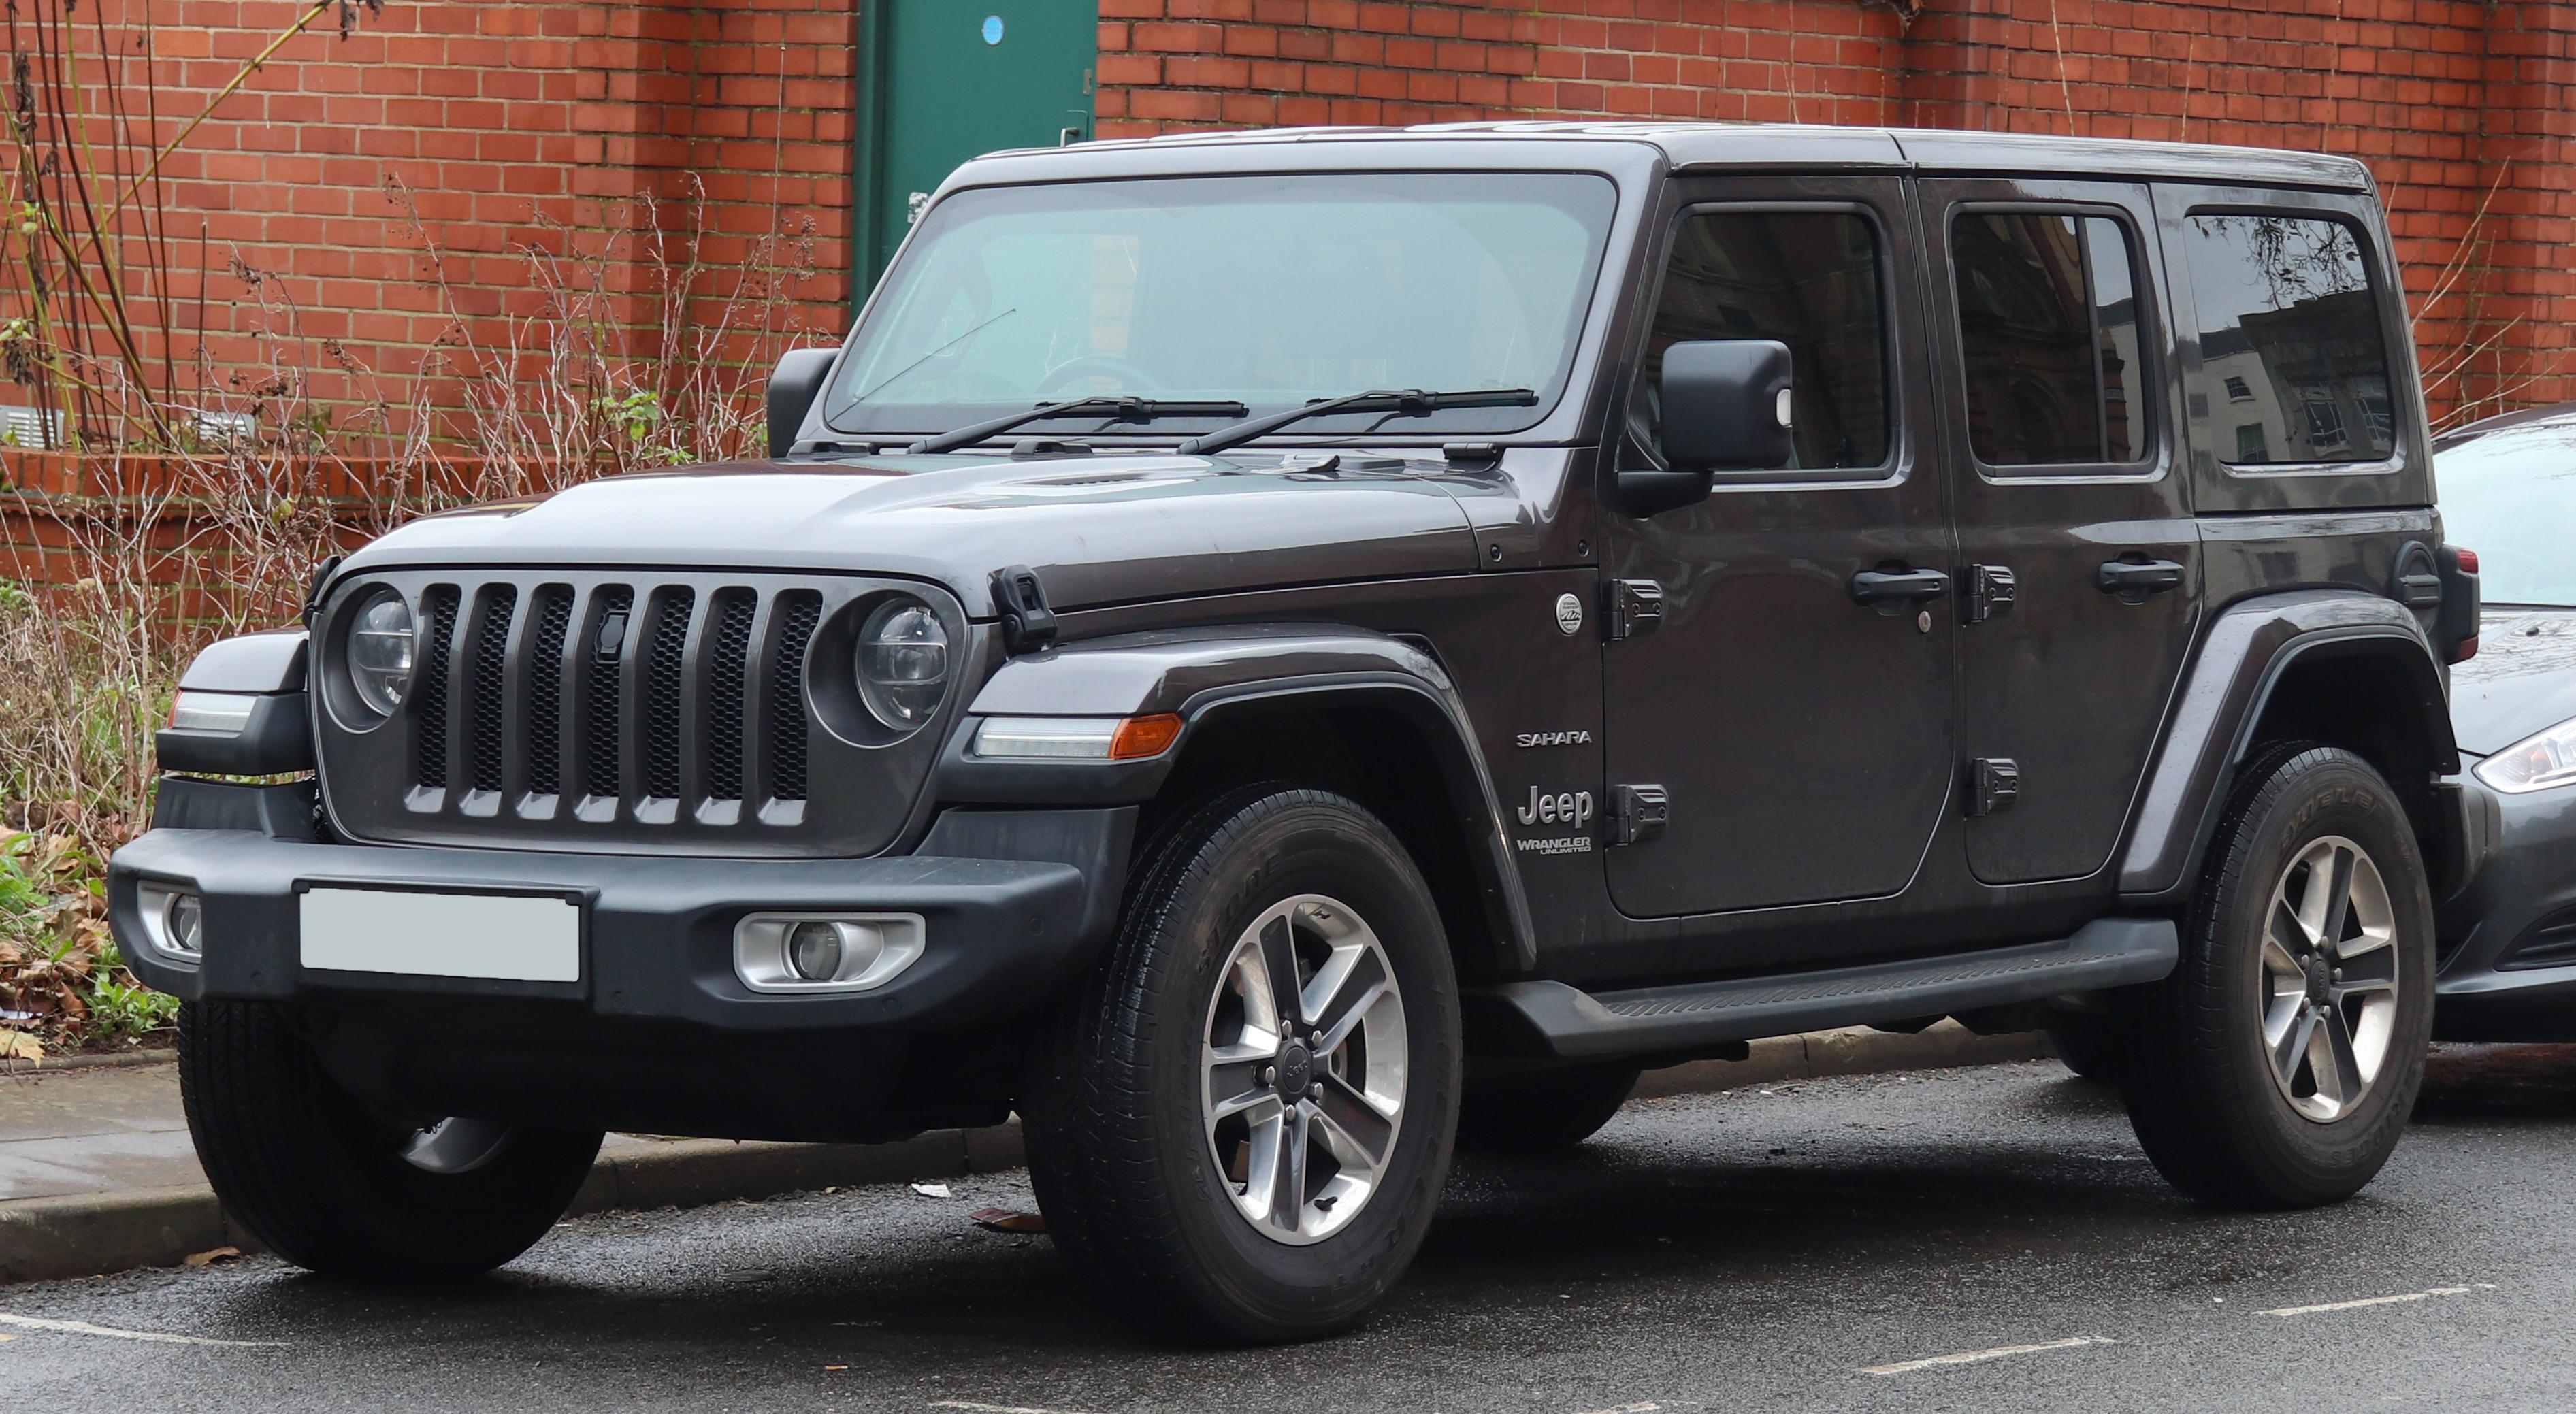 Recommended ‍Tire Brands for Jeep Wrangler